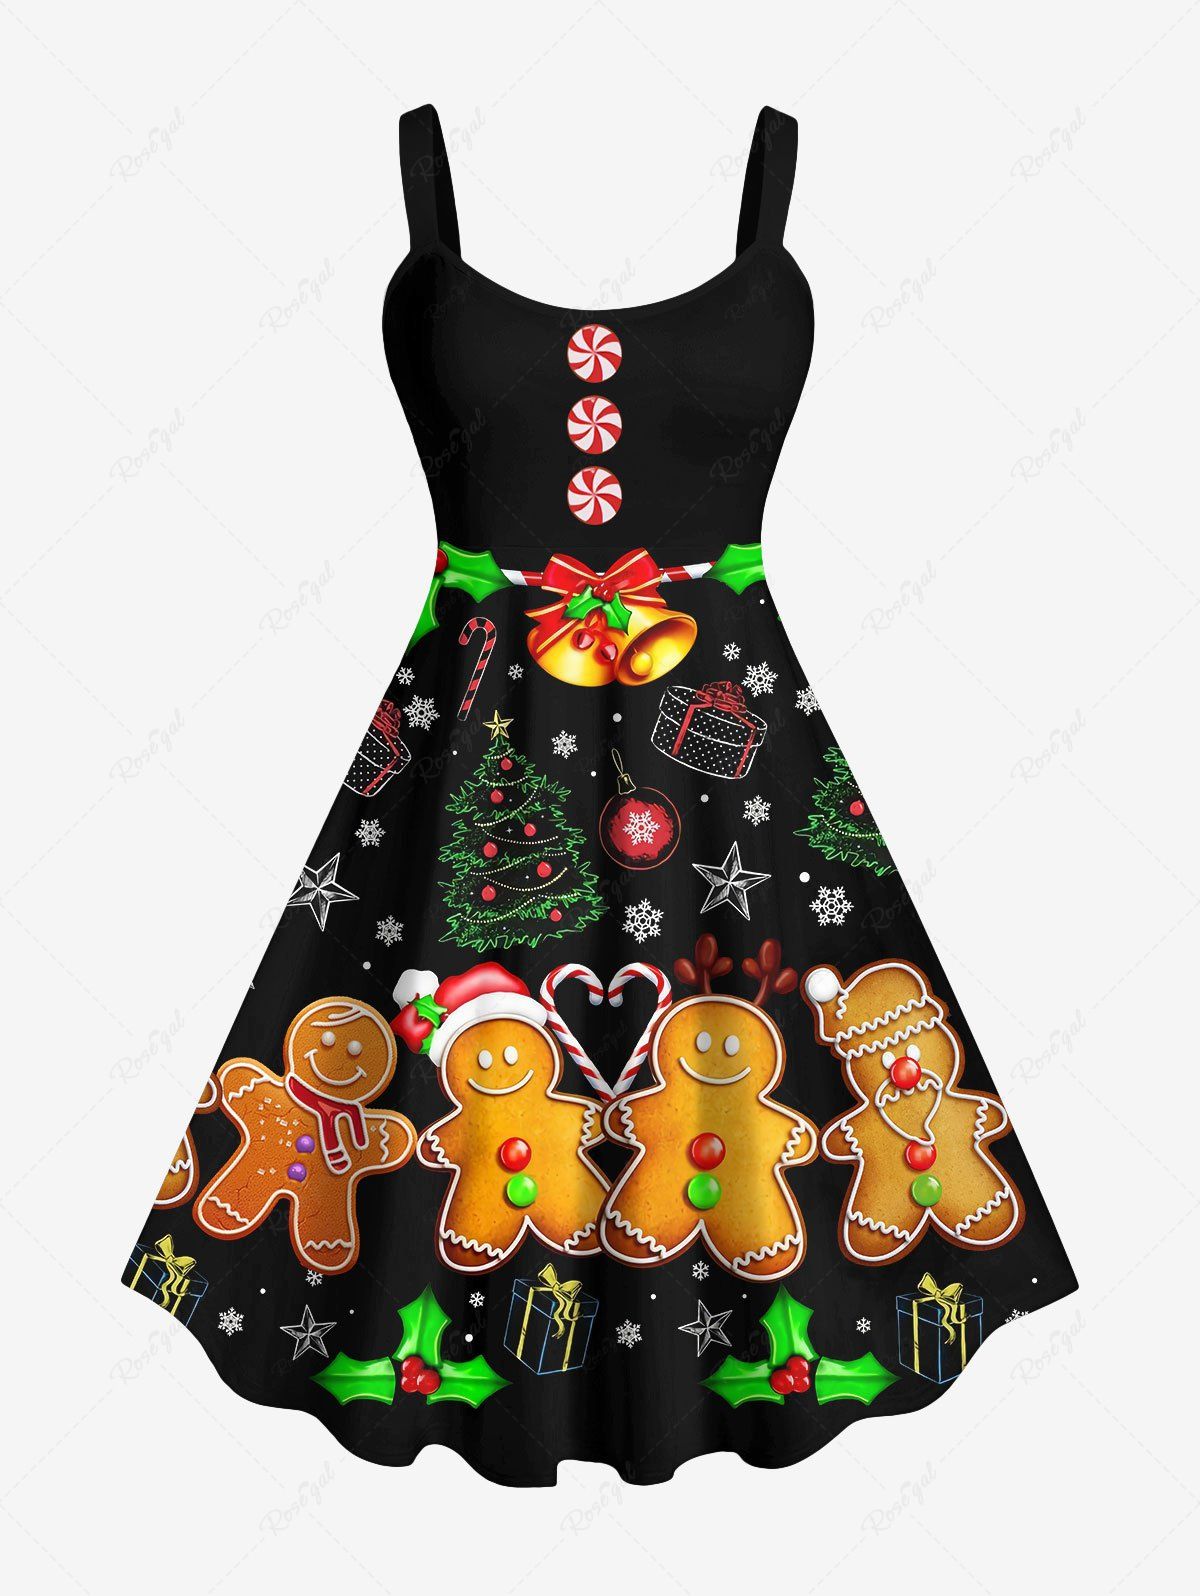 Discount Plus Size Christmas Tree Bell Gift Candy Star Snowflake Gingerbread Print Tank Dress  